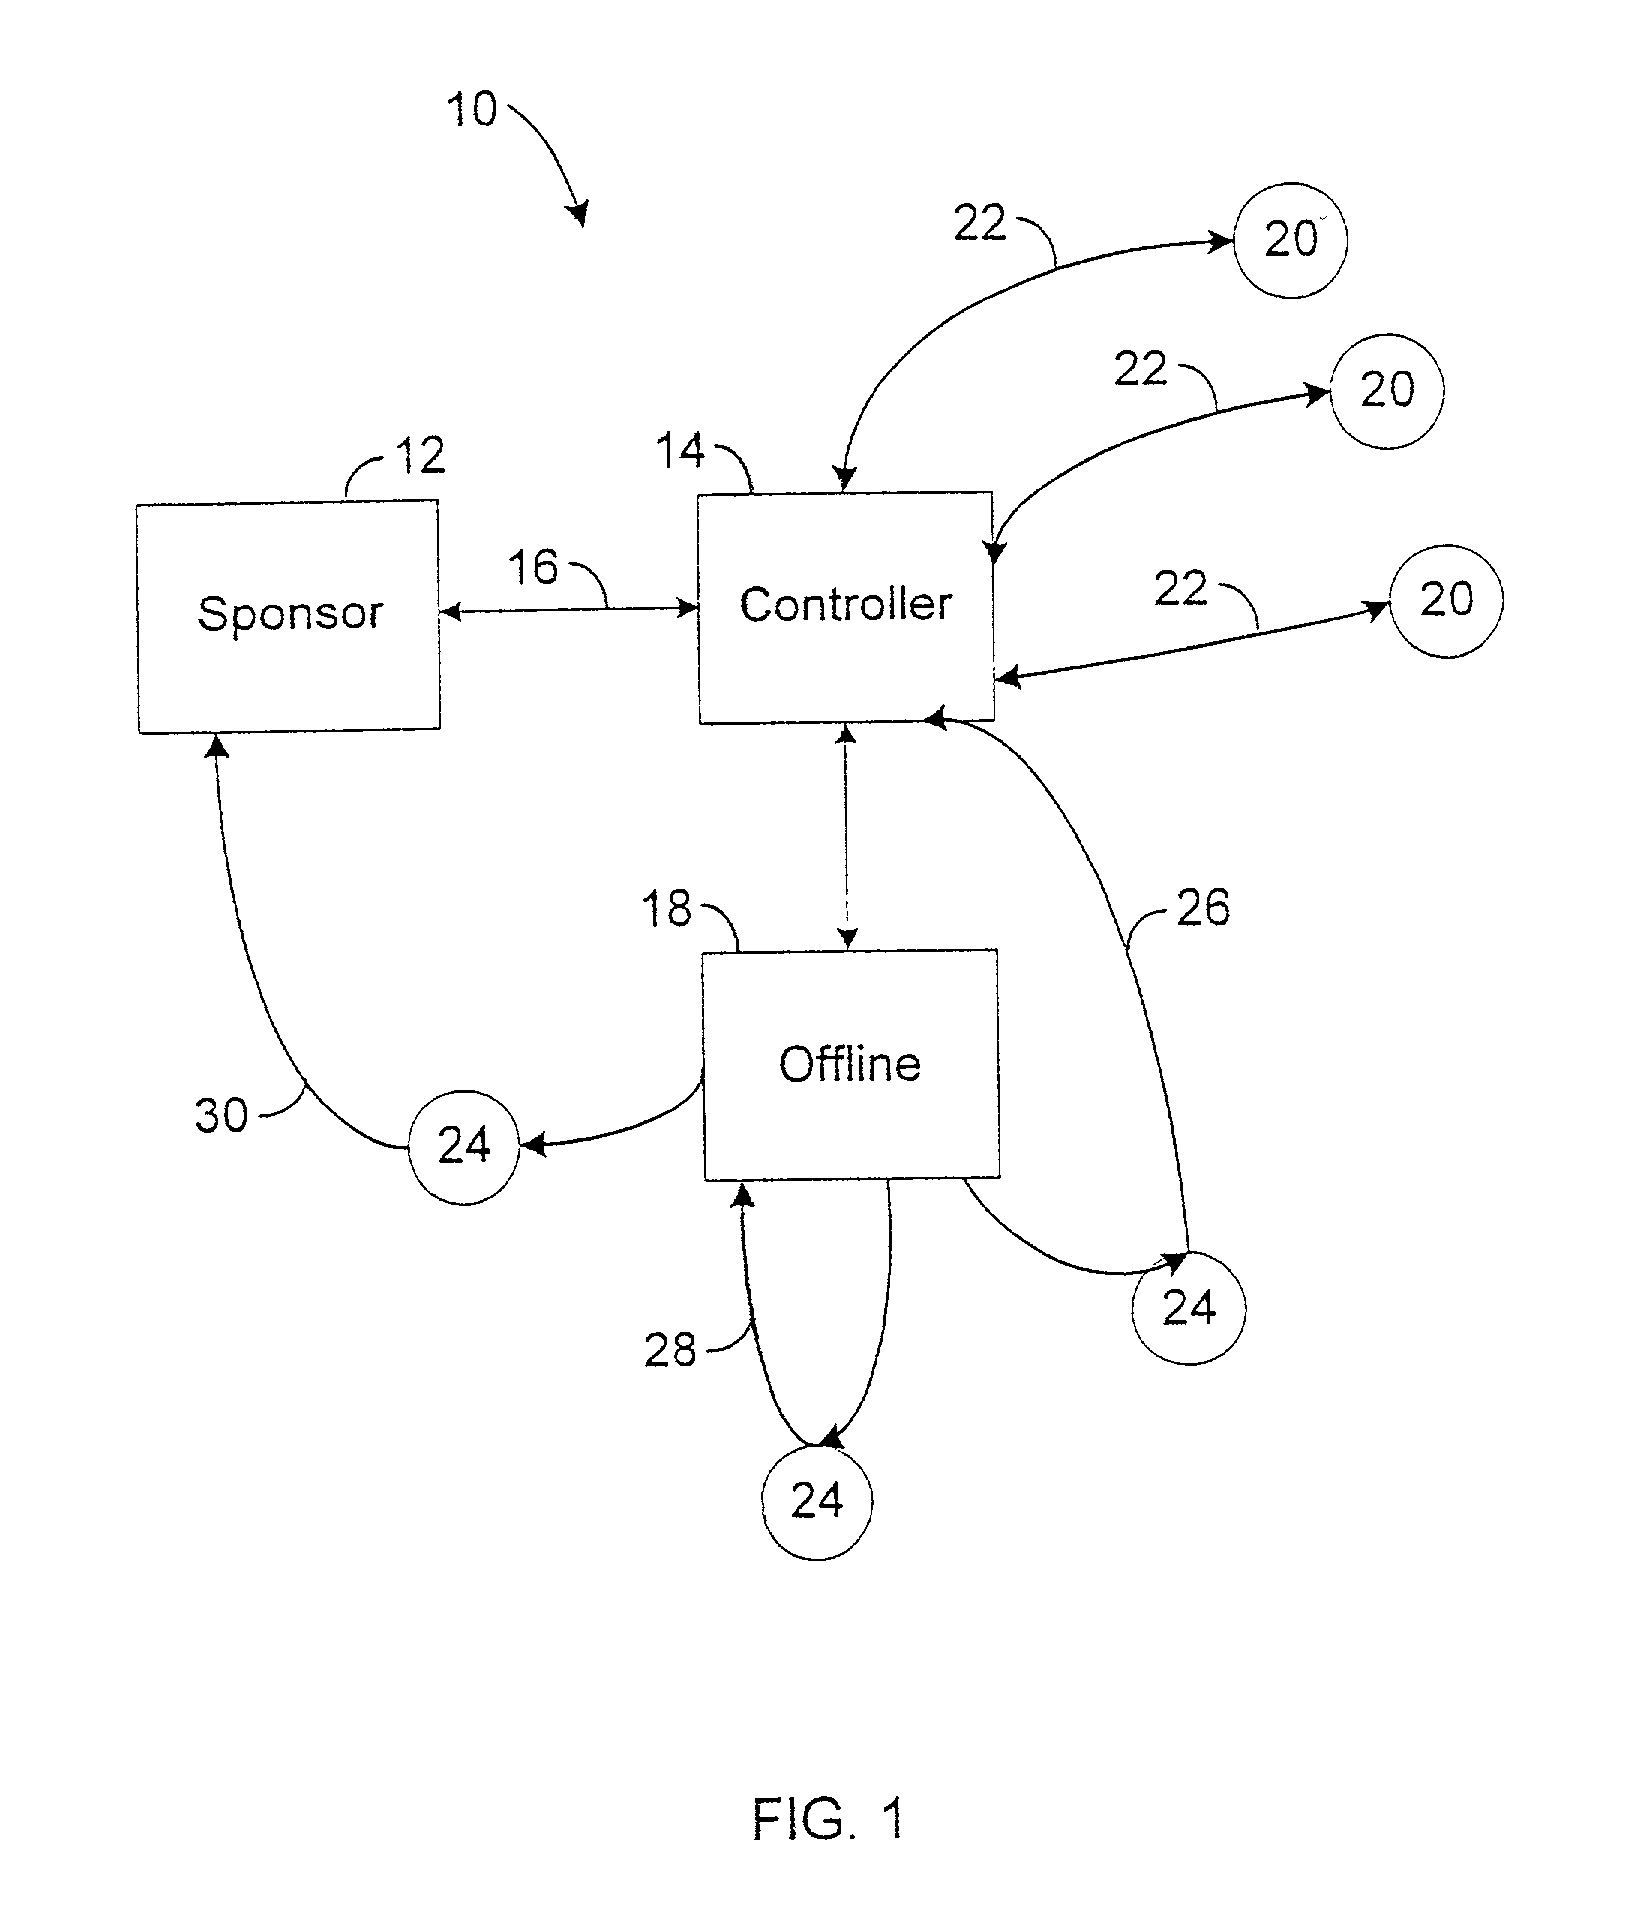 Customer driven, sponsor controlled network-based graphical scheduling system and method